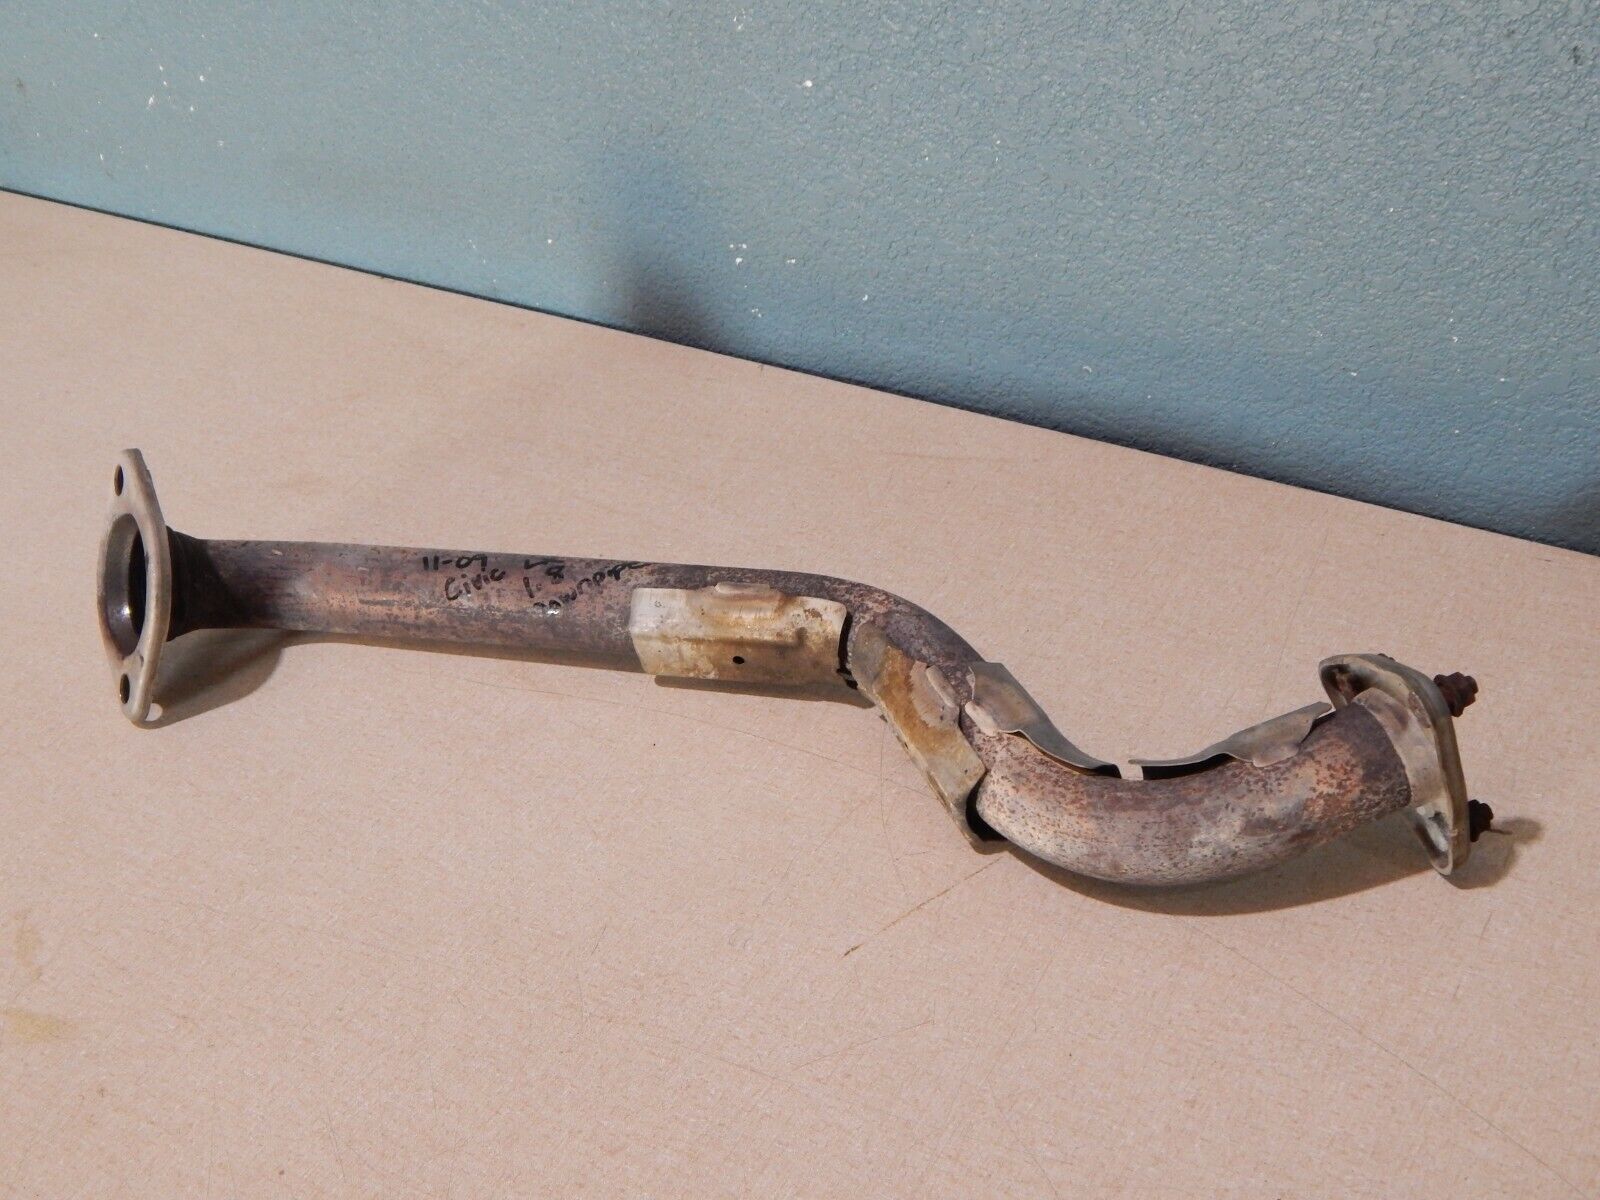 06 07 08 09 10 11 Civic 4D 1.8L Engine Exhaust Down Pipe